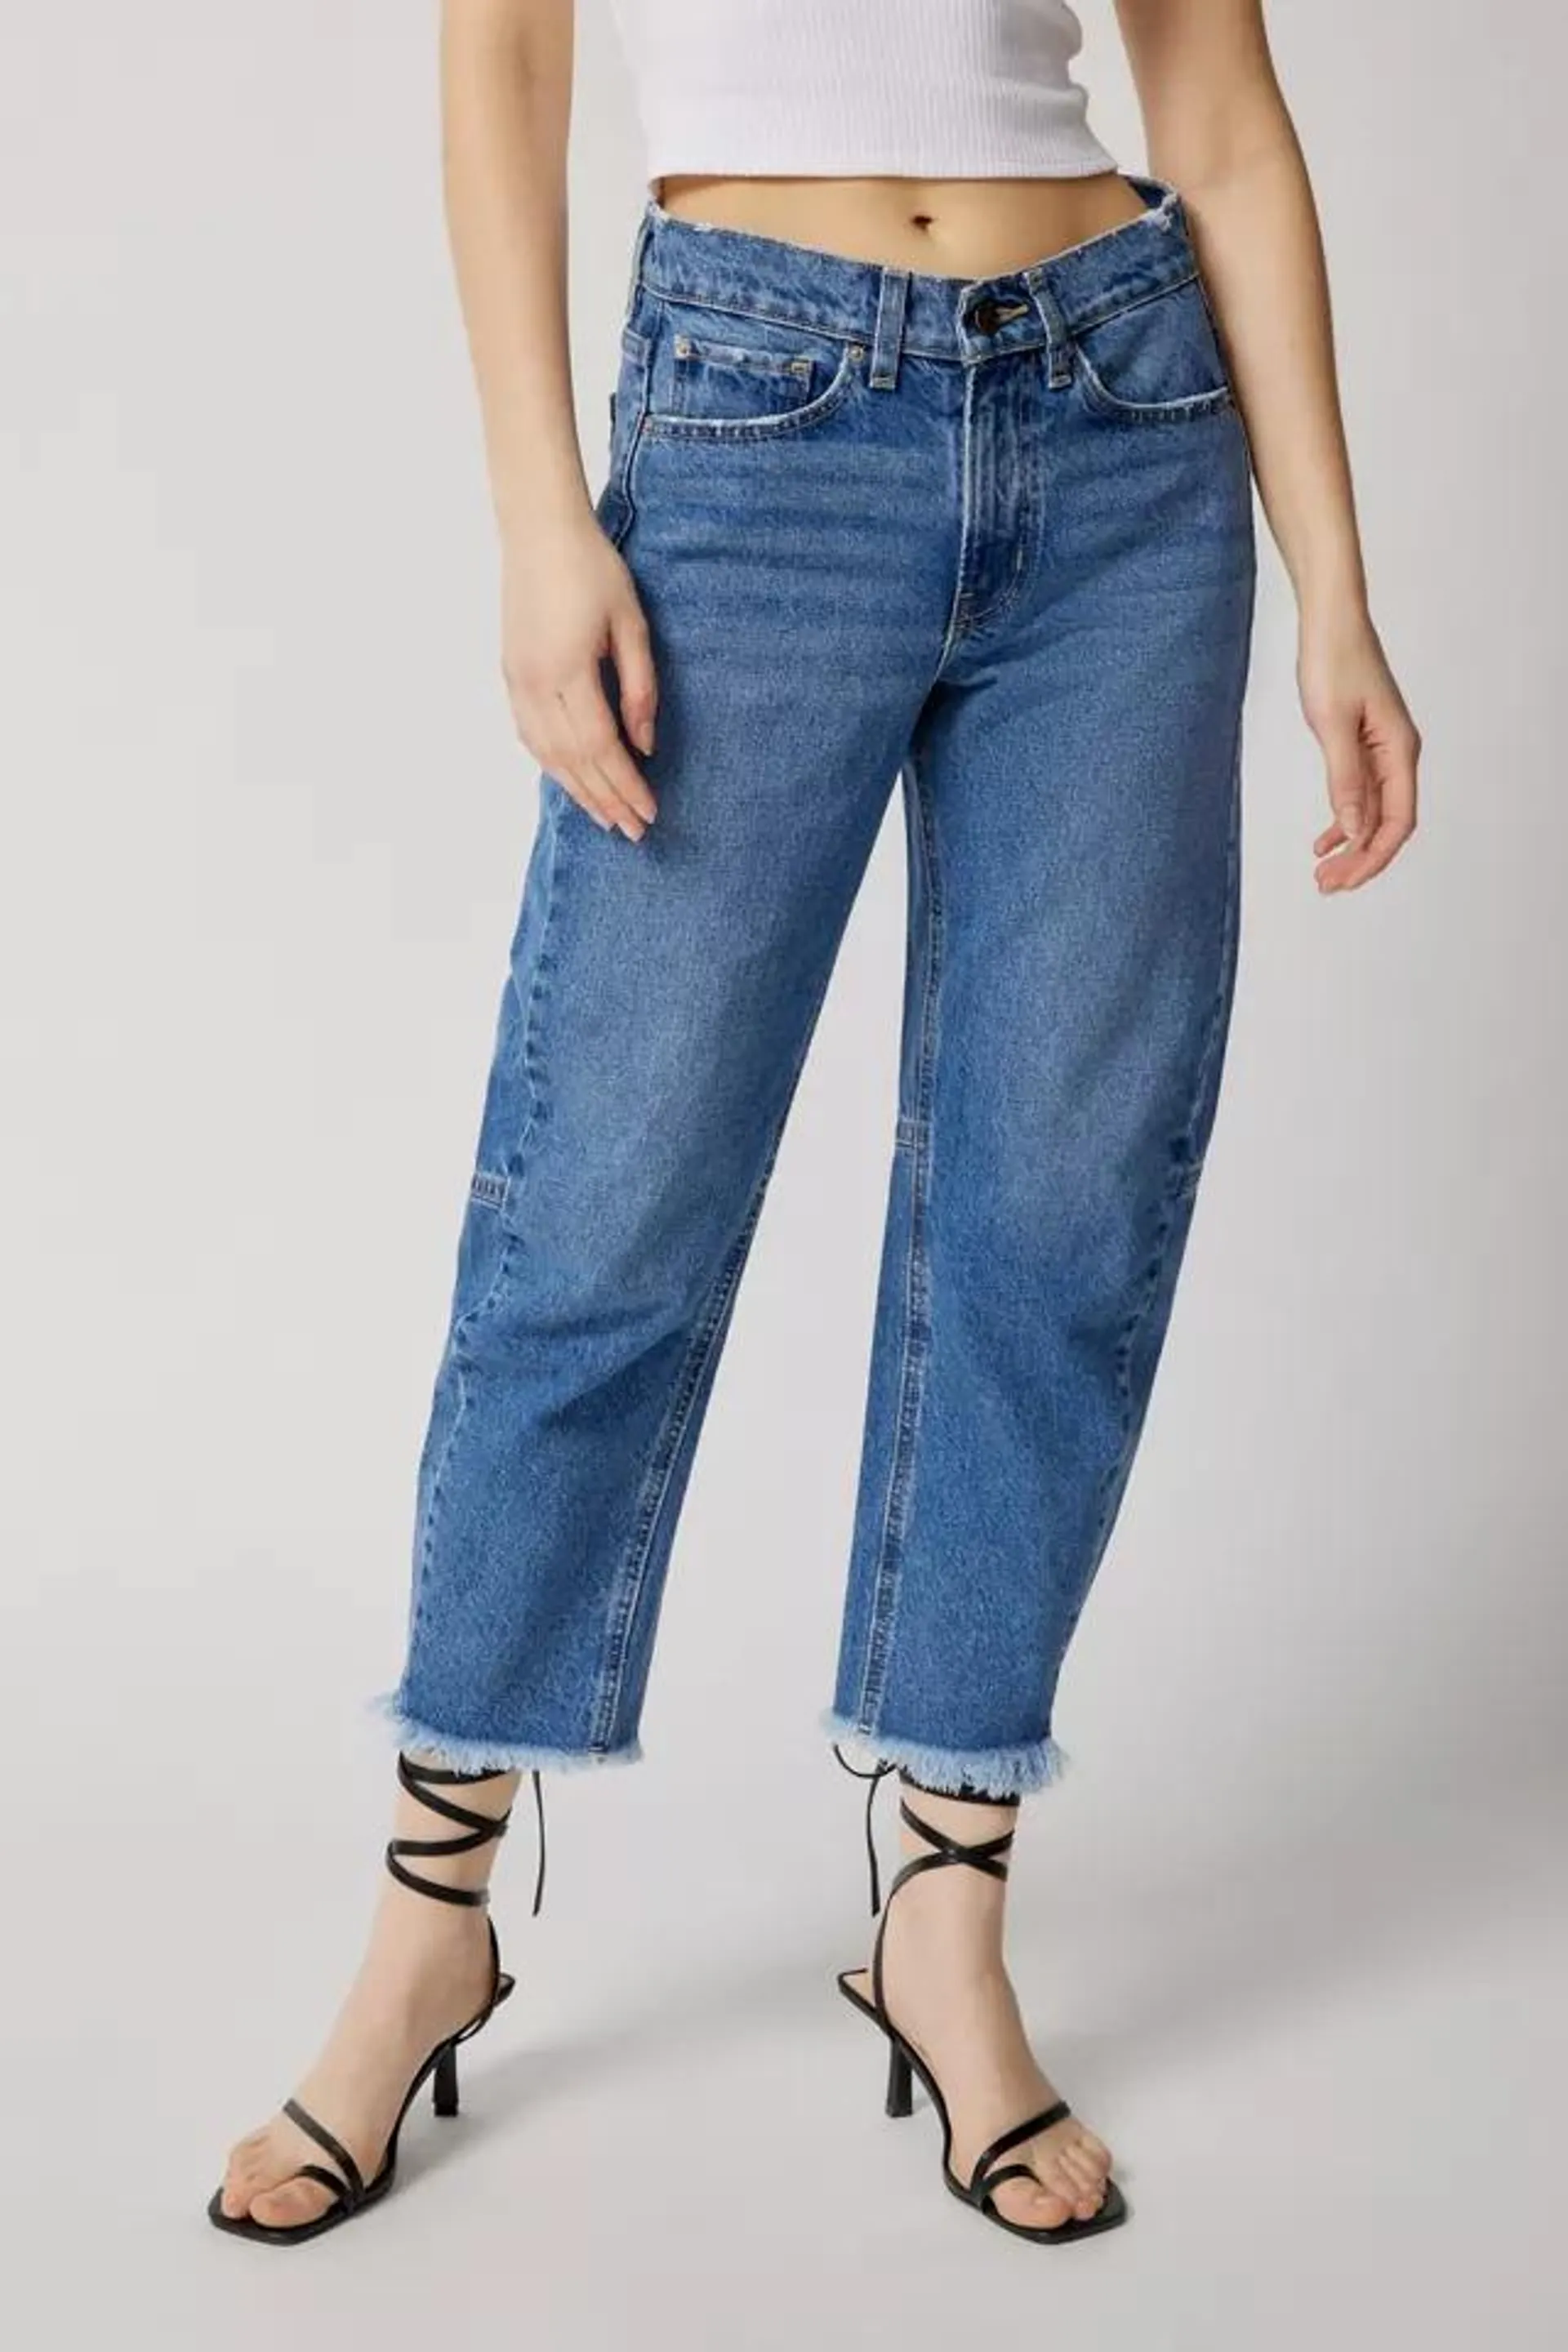 BDG Tapered Cropped Jean